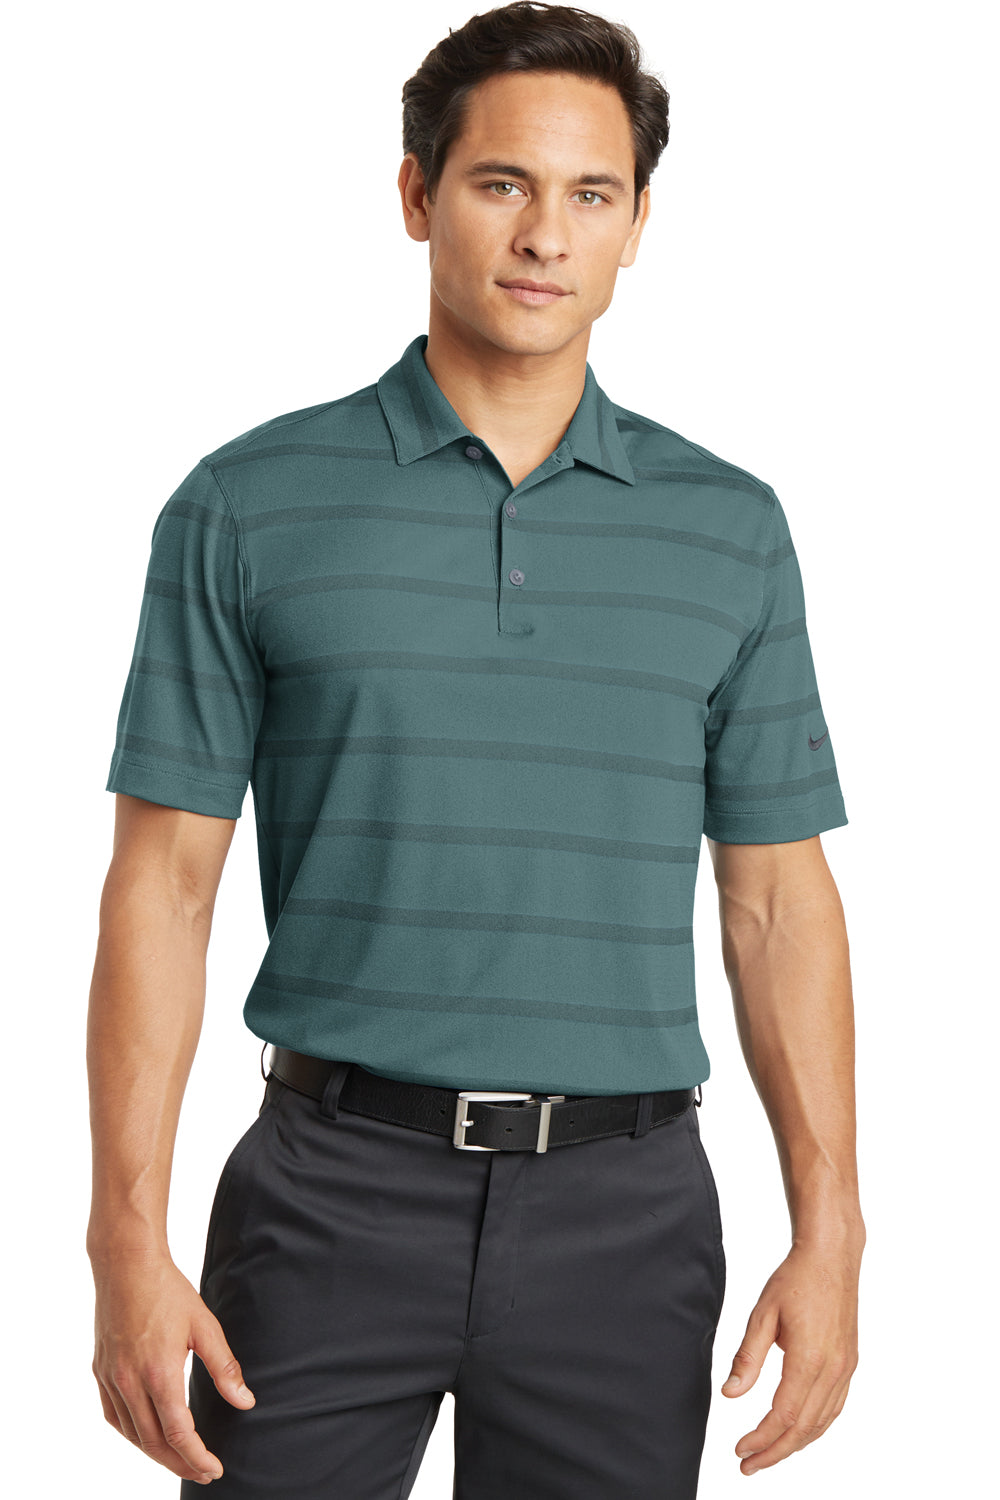 Nike 677786 Mens Dri-Fit Moisture Wicking Short Sleeve Polo Shirt Teal Green/Anthracite Grey Front